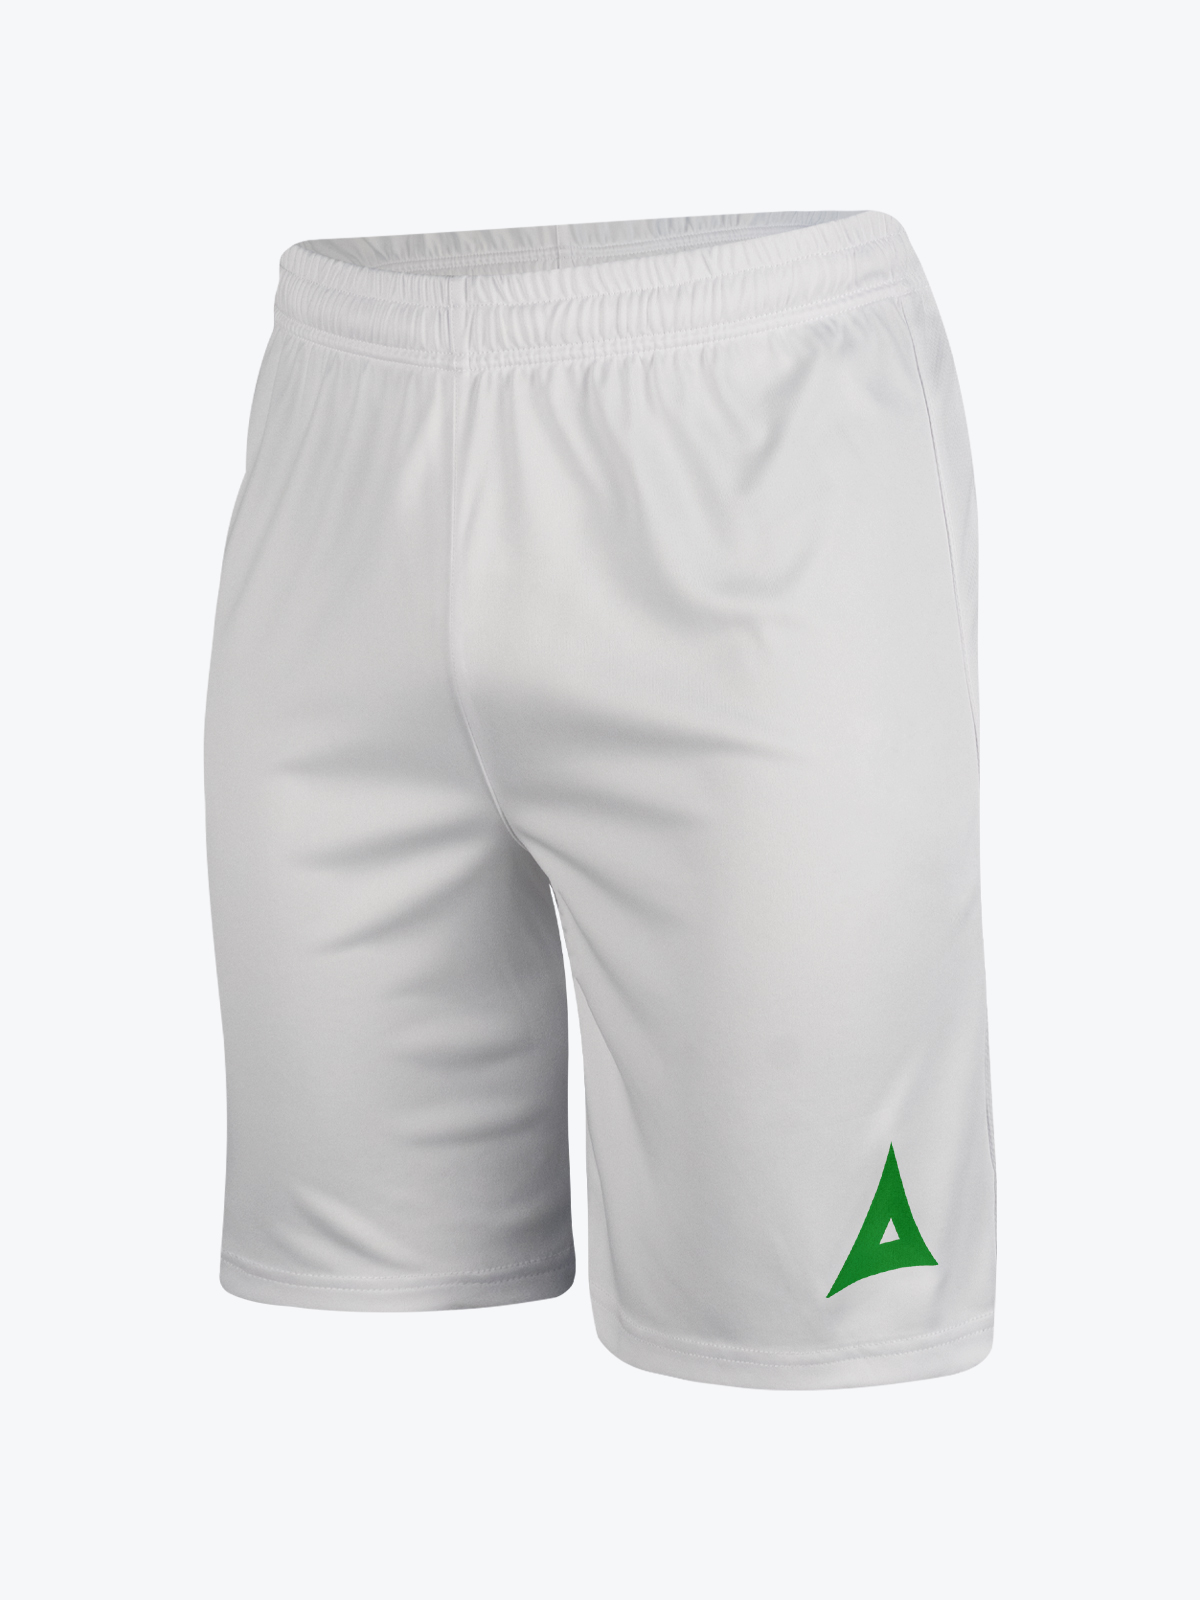 picture of focus 2 classic short - white/green